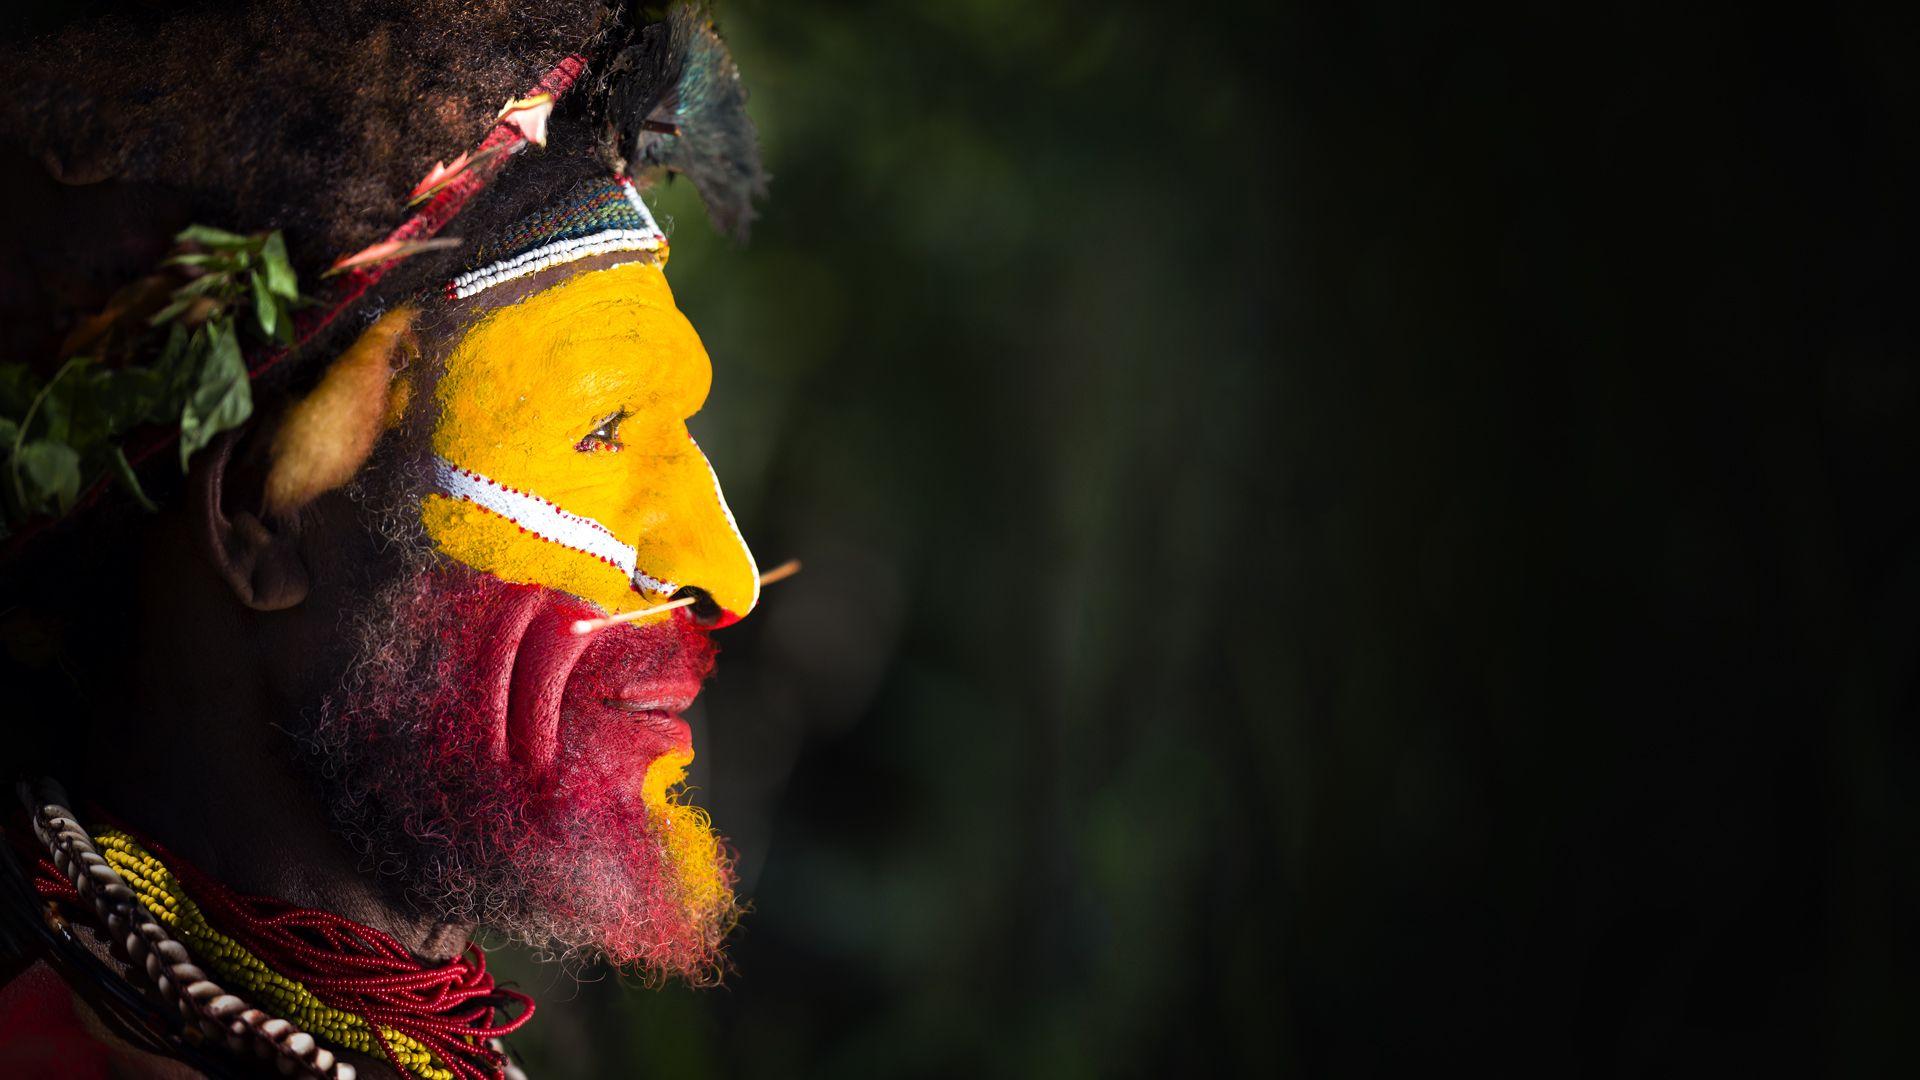 Adventures in Photography Papua New Guinea with Chris McLennan